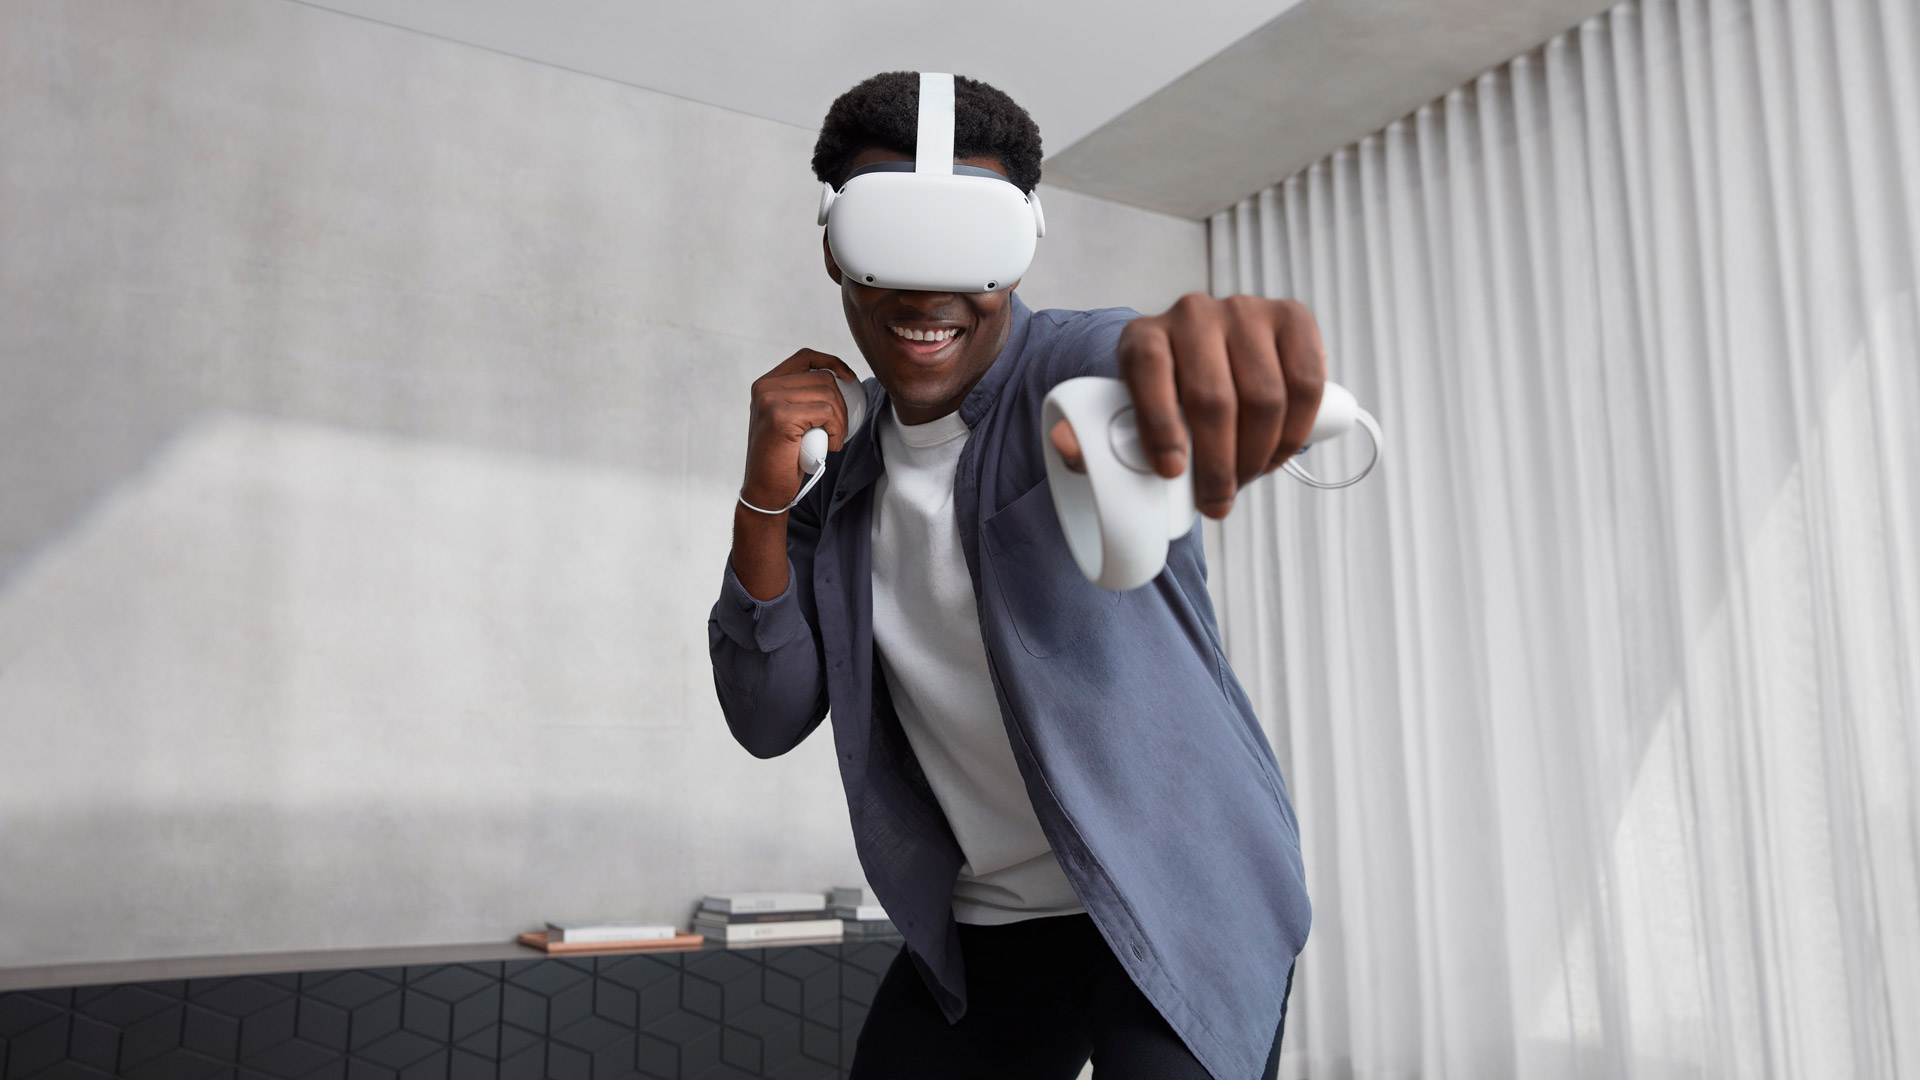 vr games compatible with oculus quest